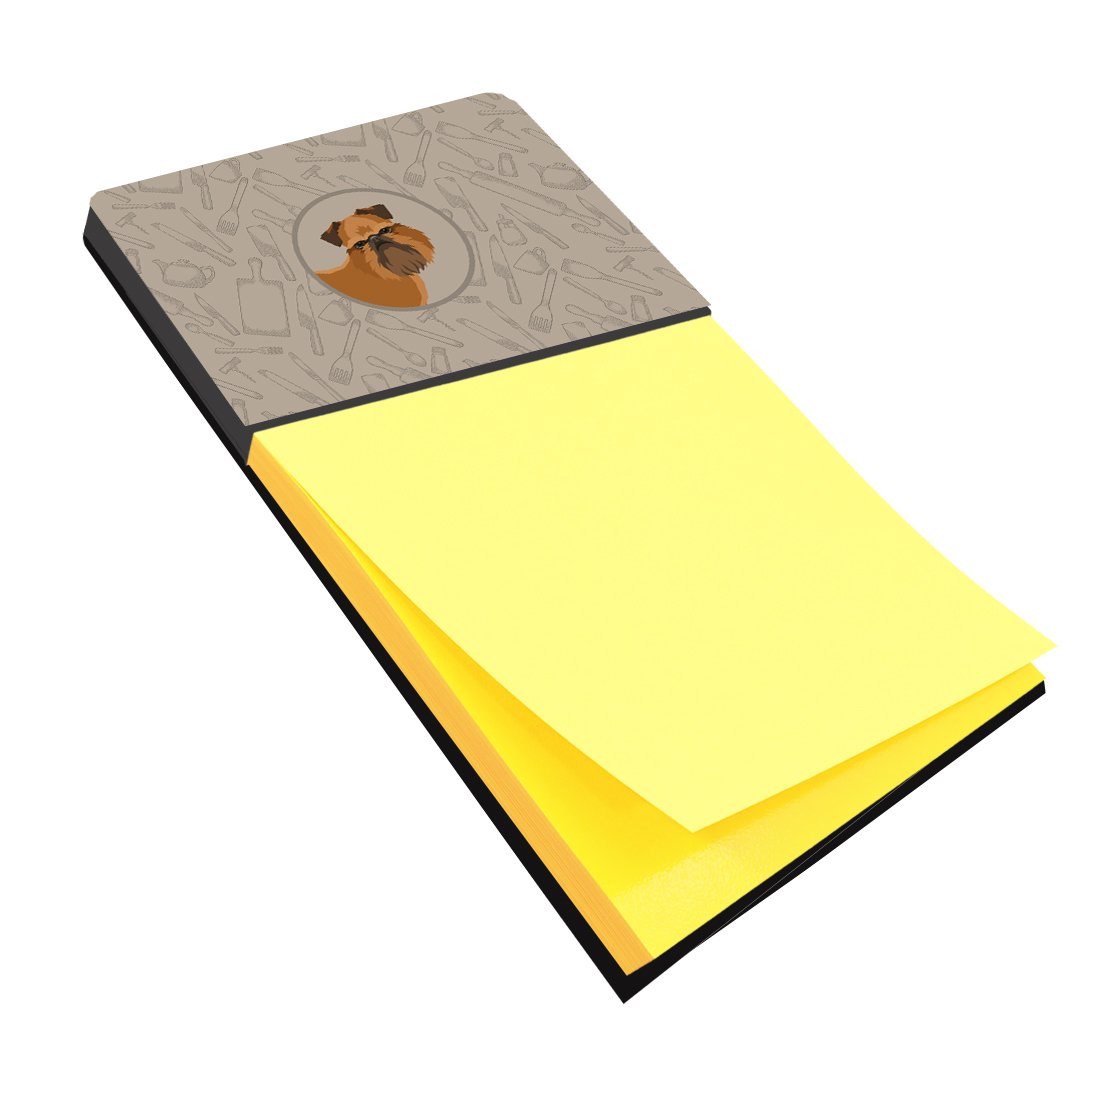 Brussels Griffon In the Kitchen Sticky Note Holder CK2191SN by Caroline's Treasures